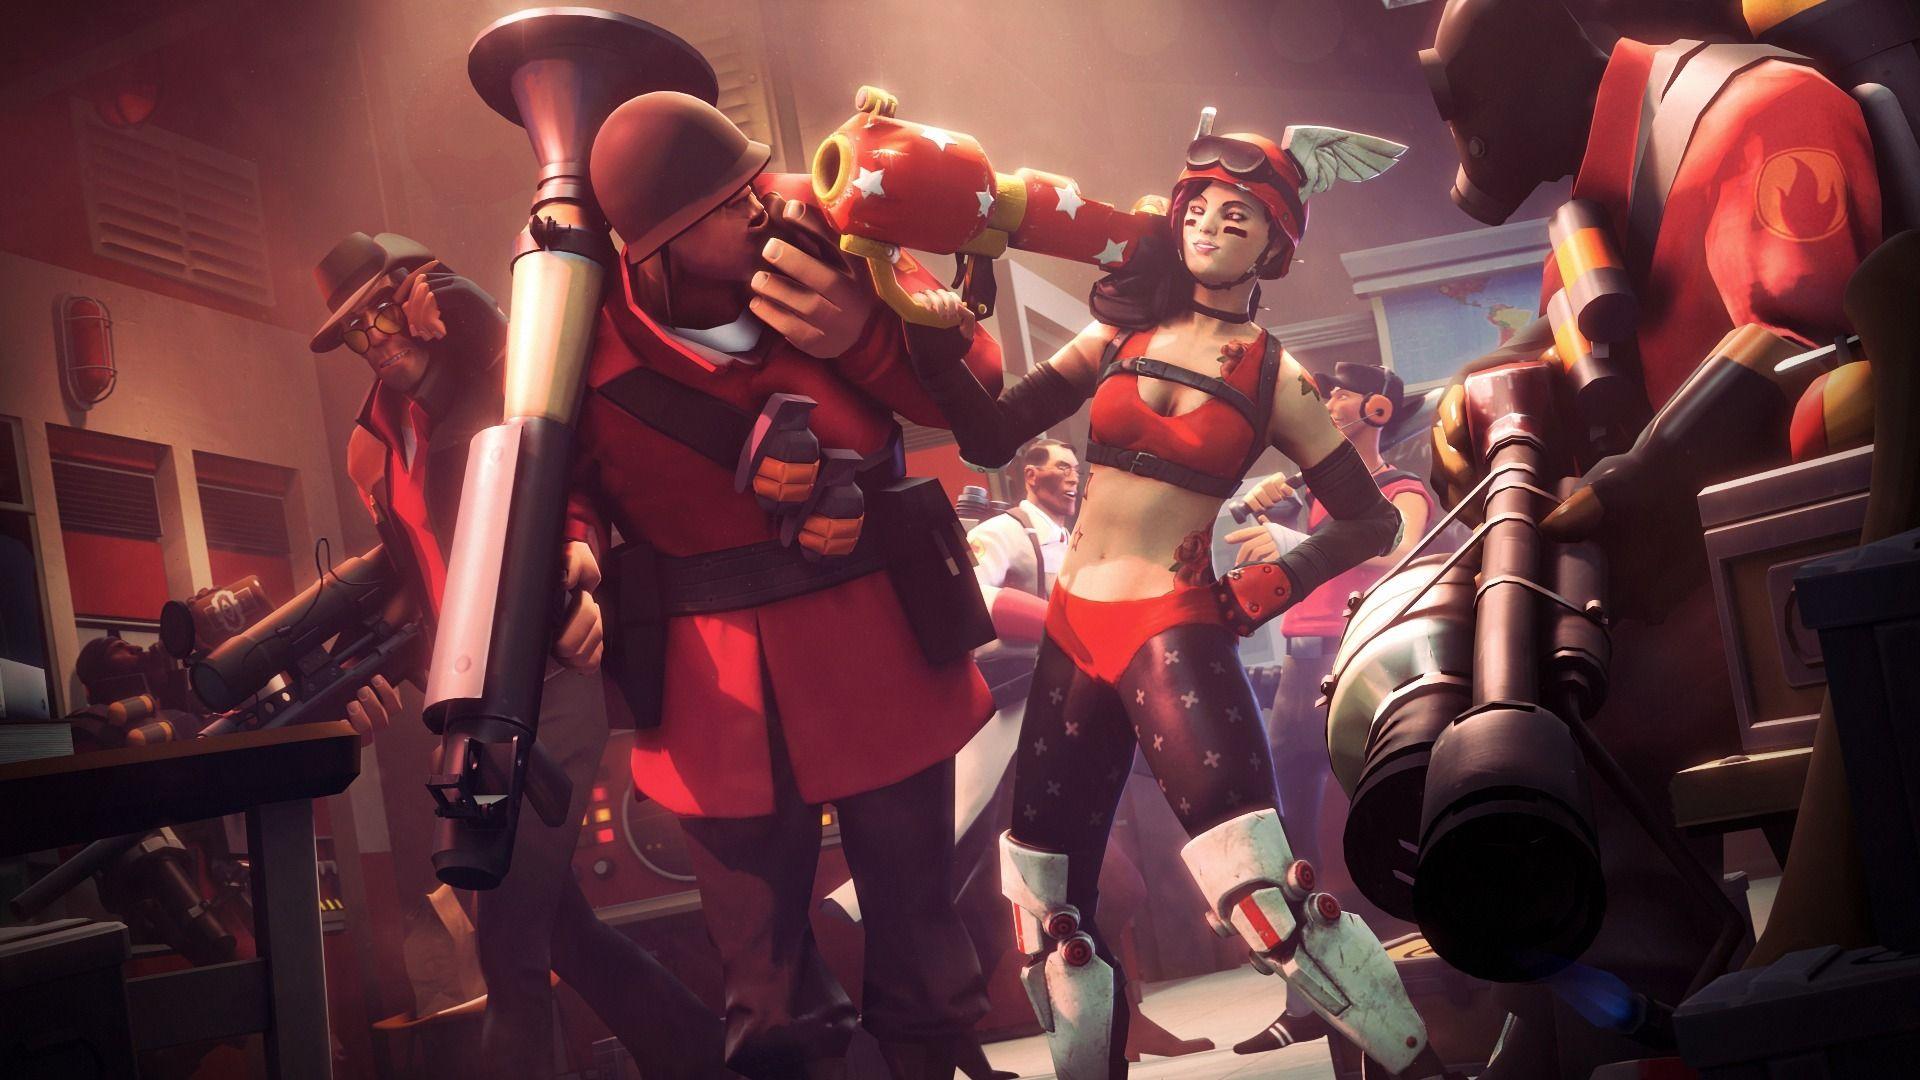 Wallpapers Wallpapers from Team Fortress 2